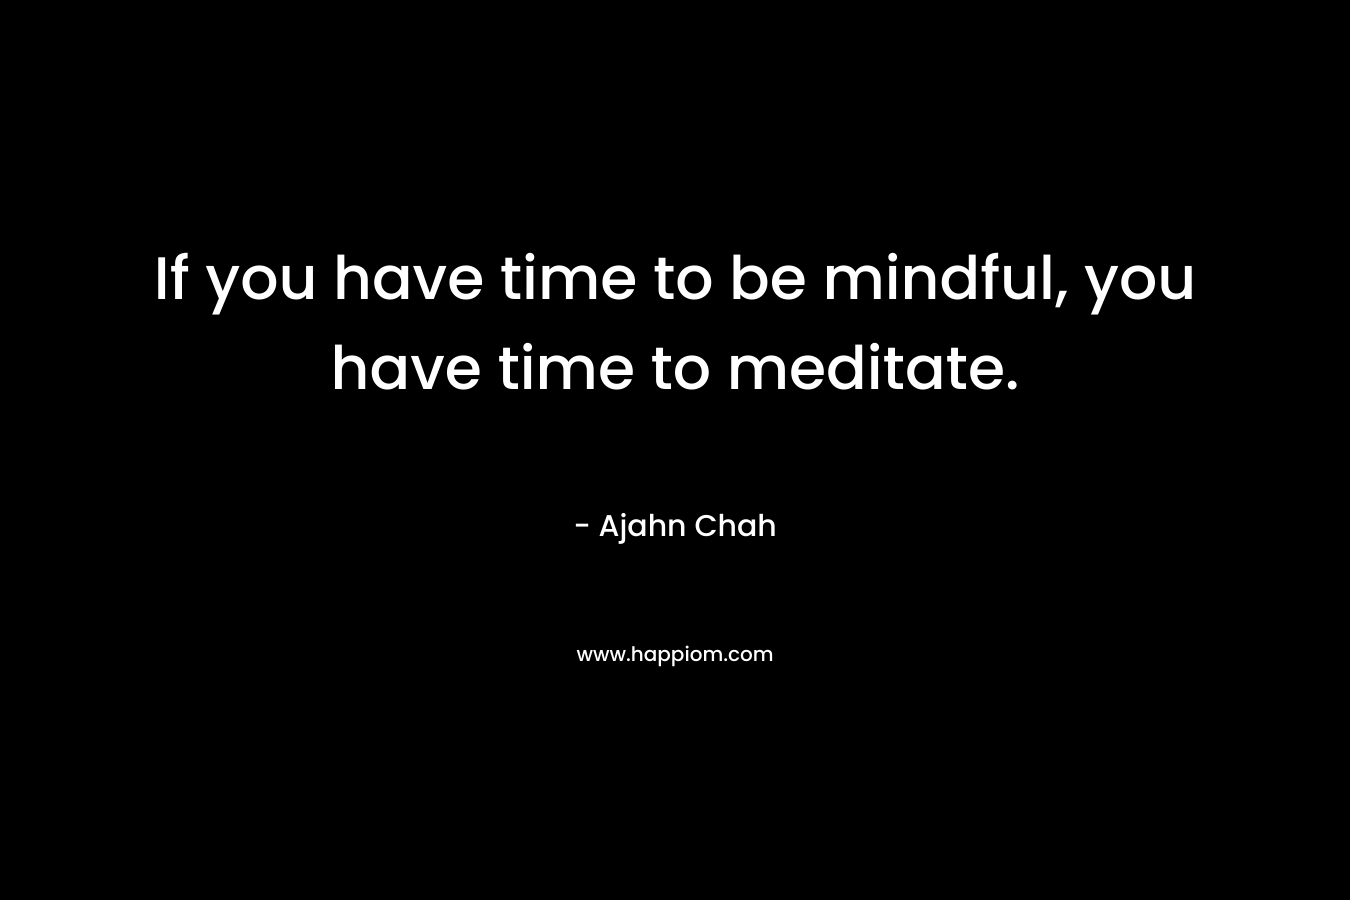 If you have time to be mindful, you have time to meditate. – Ajahn Chah